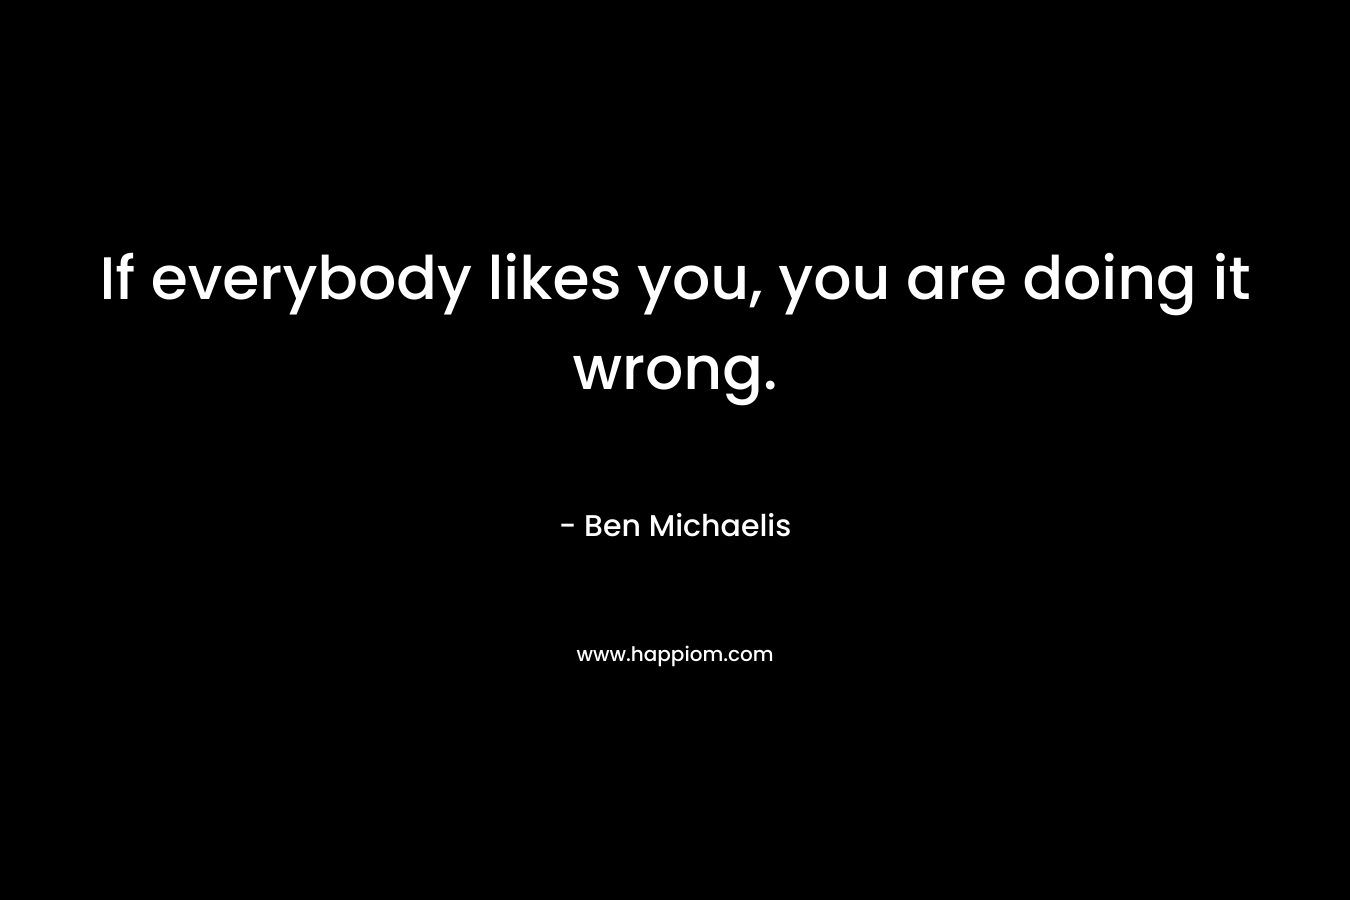 If everybody likes you, you are doing it wrong.